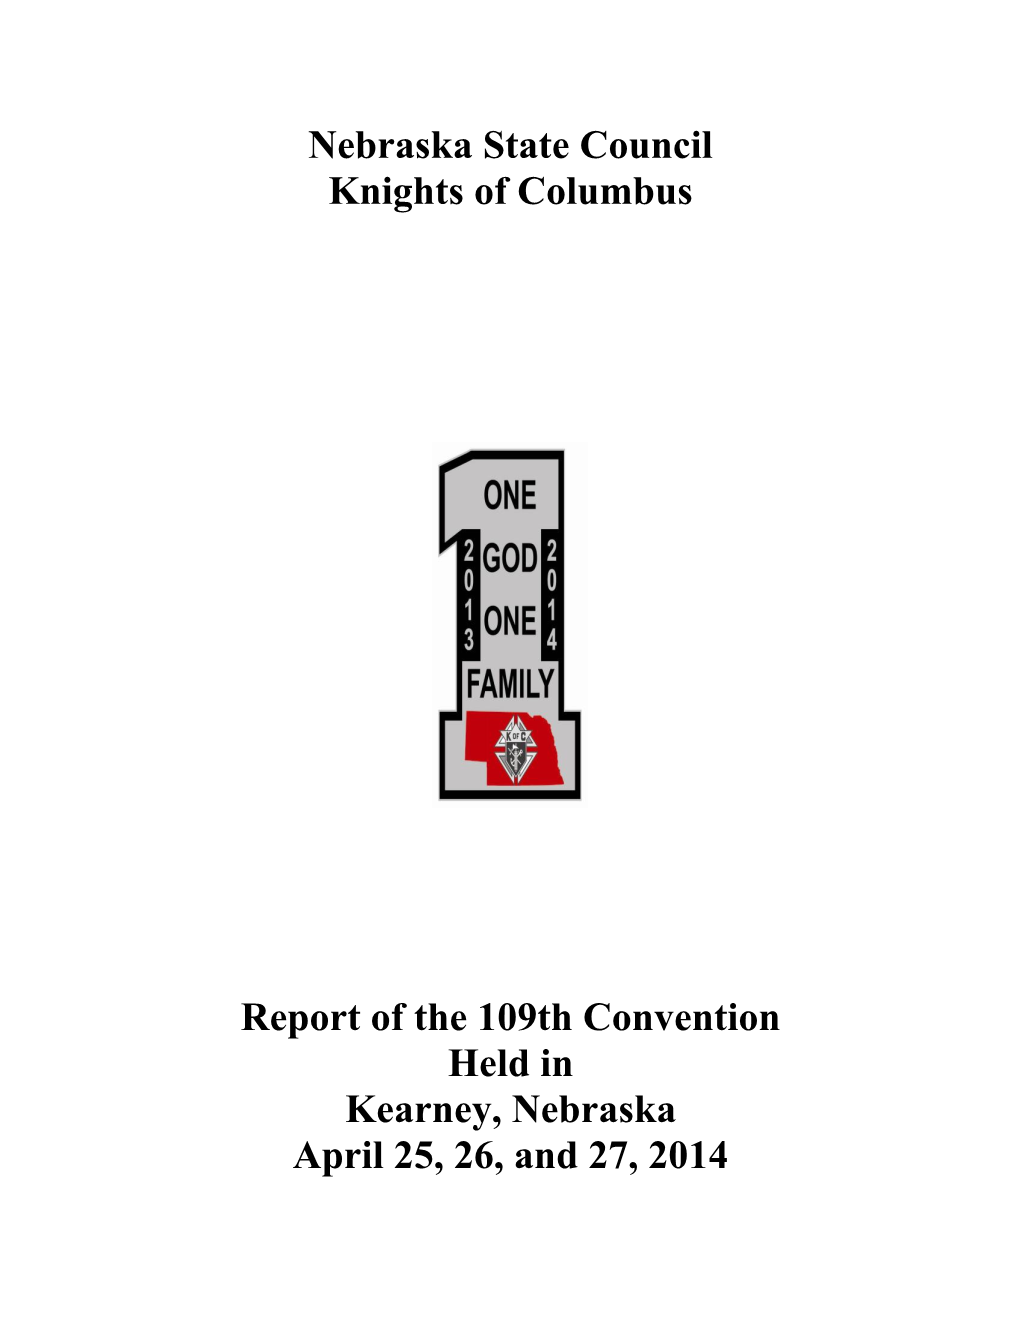 Nebraska State Council Knights of Columbus Report of the 109Th